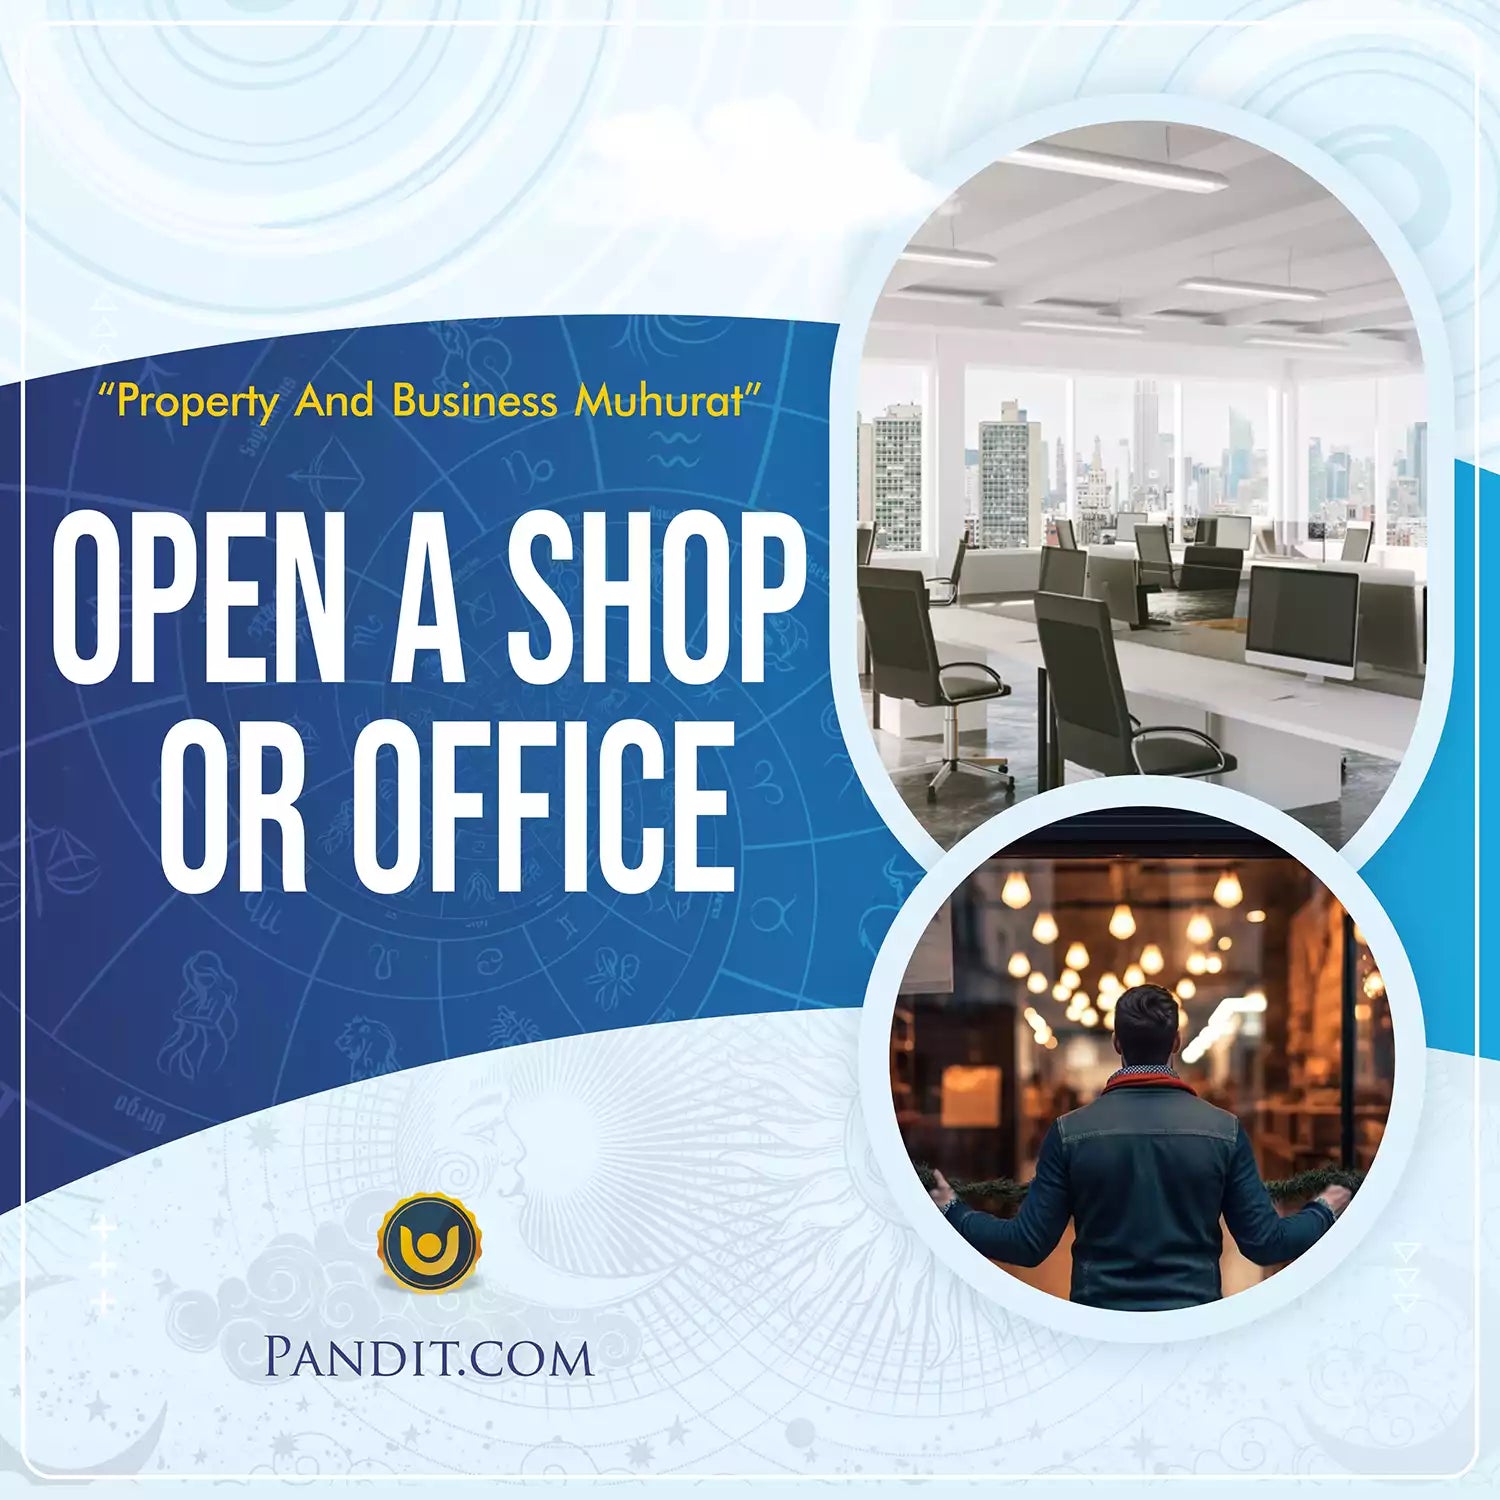 Open a Shop or Office